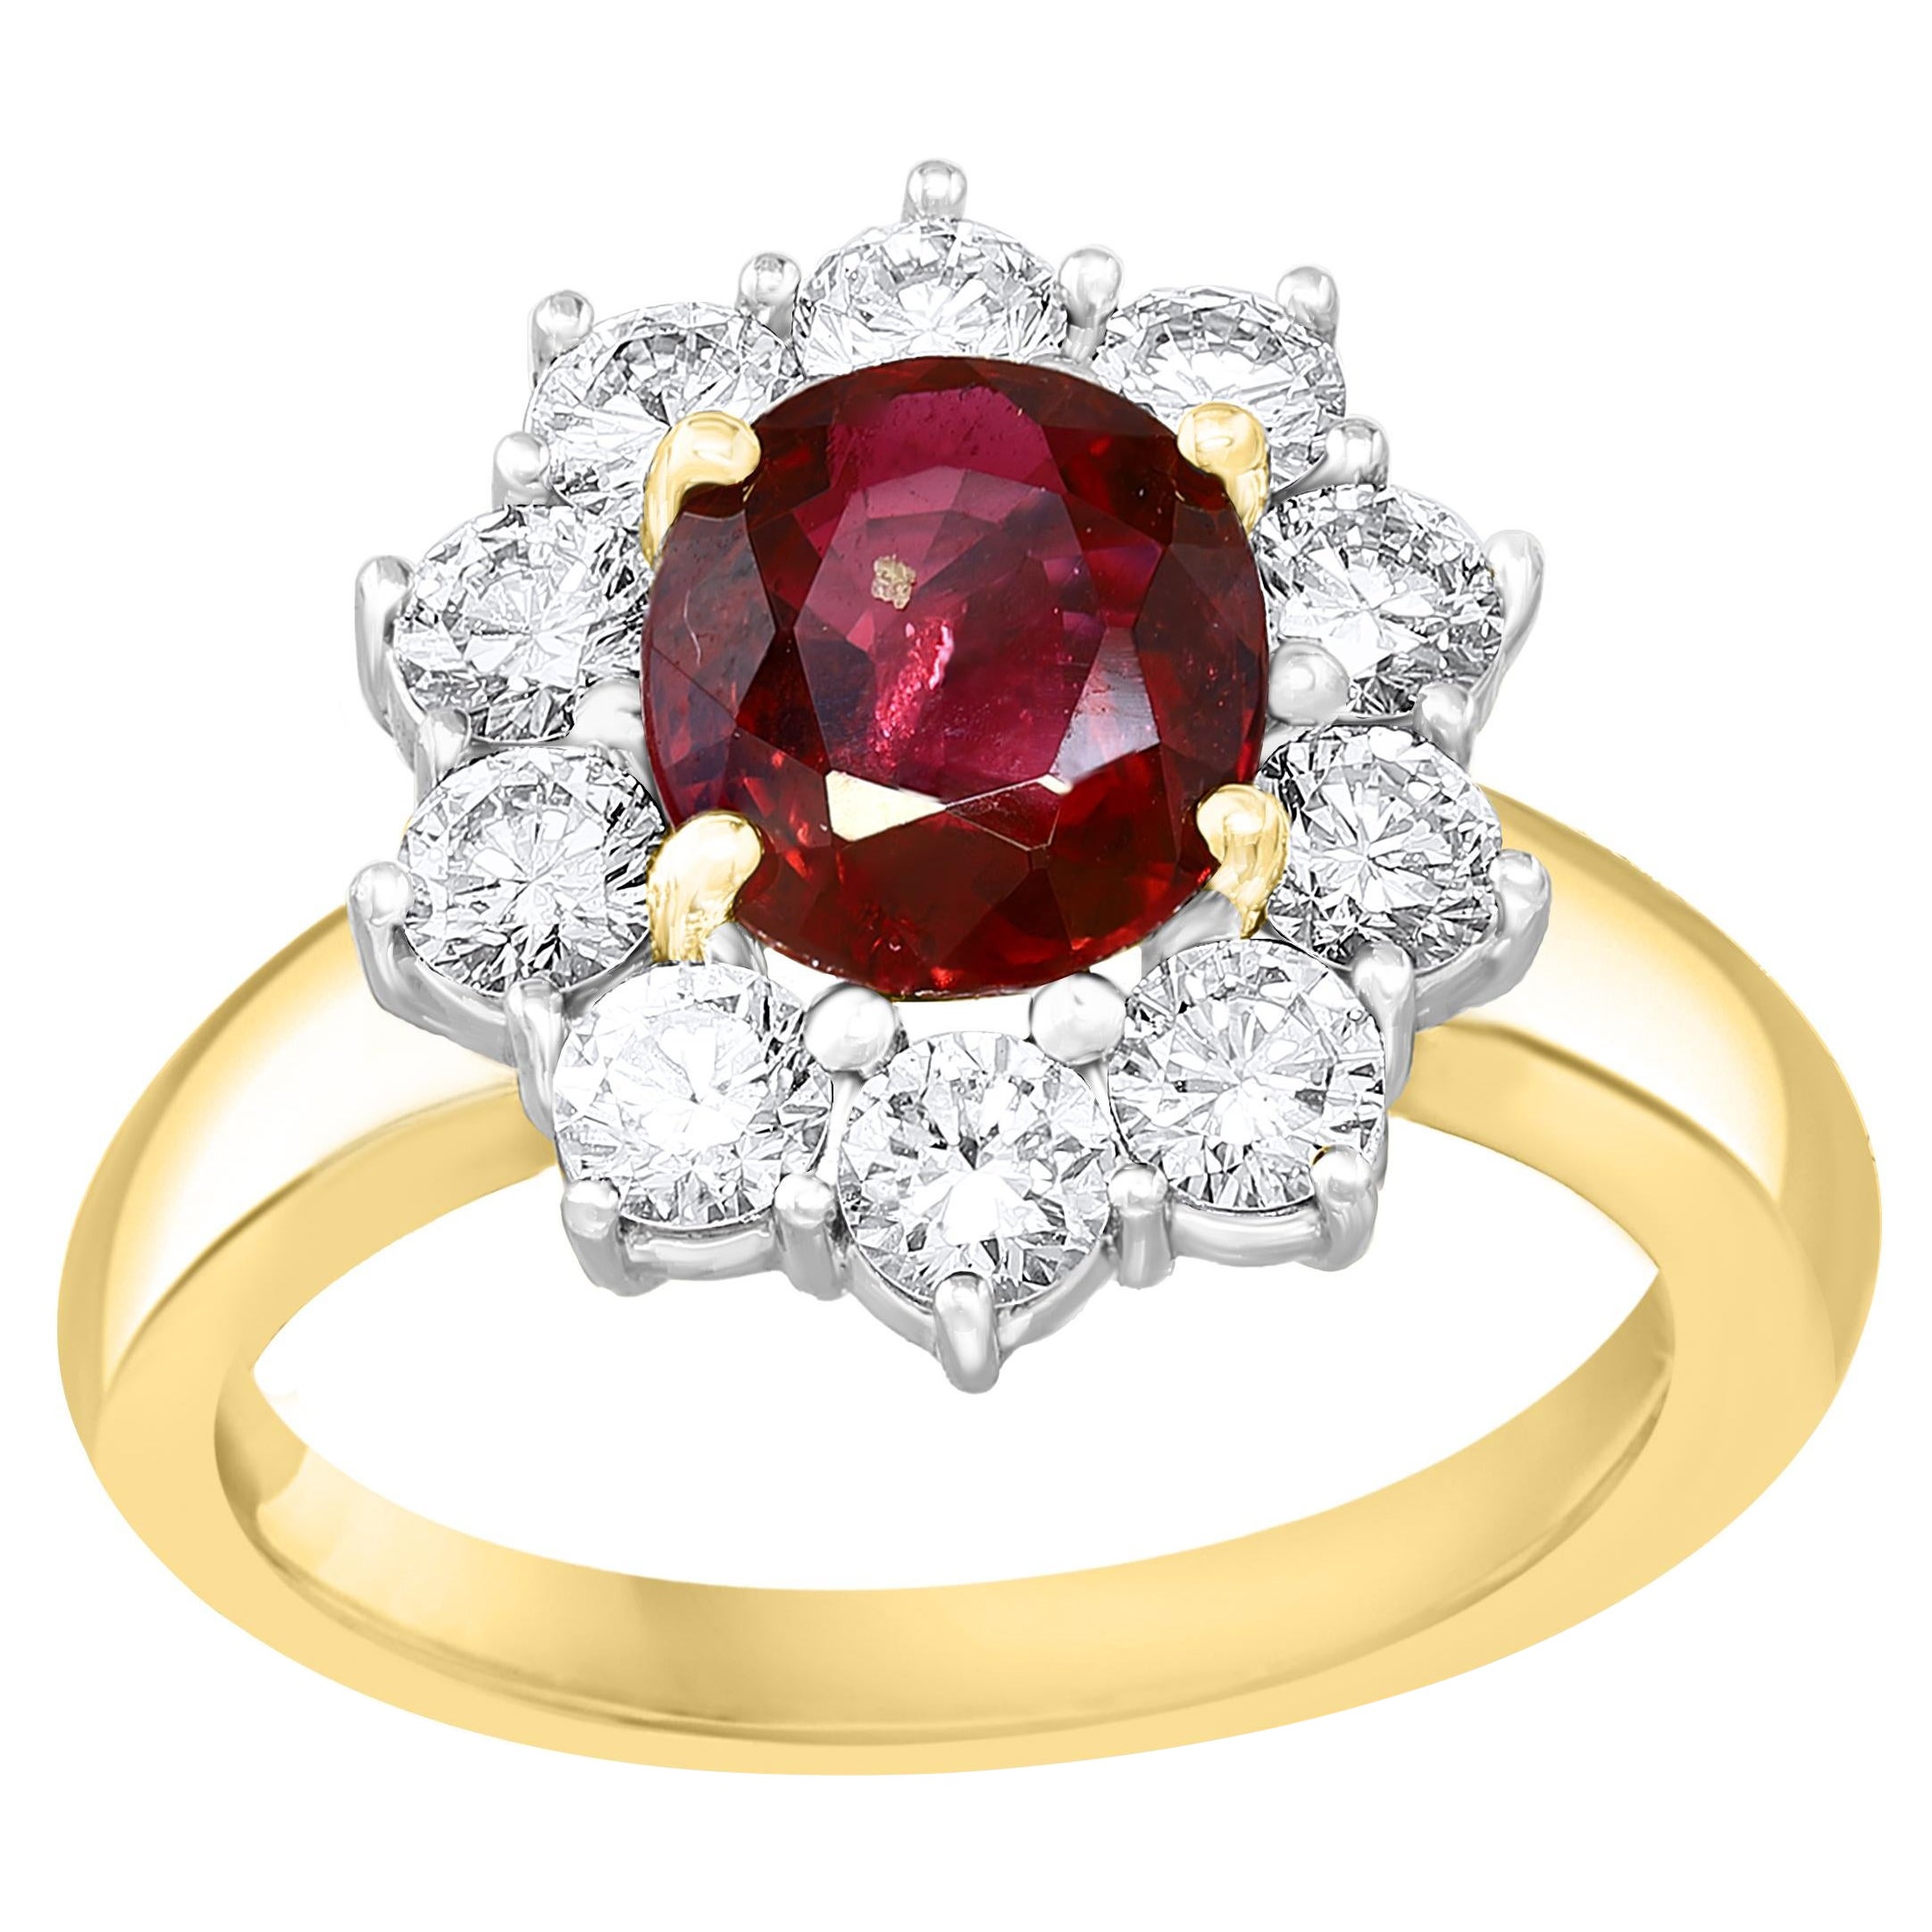 2.01 Carat Round Brilliant Cut Ruby and Diamond Fashion Ring in 18K Mix Gold